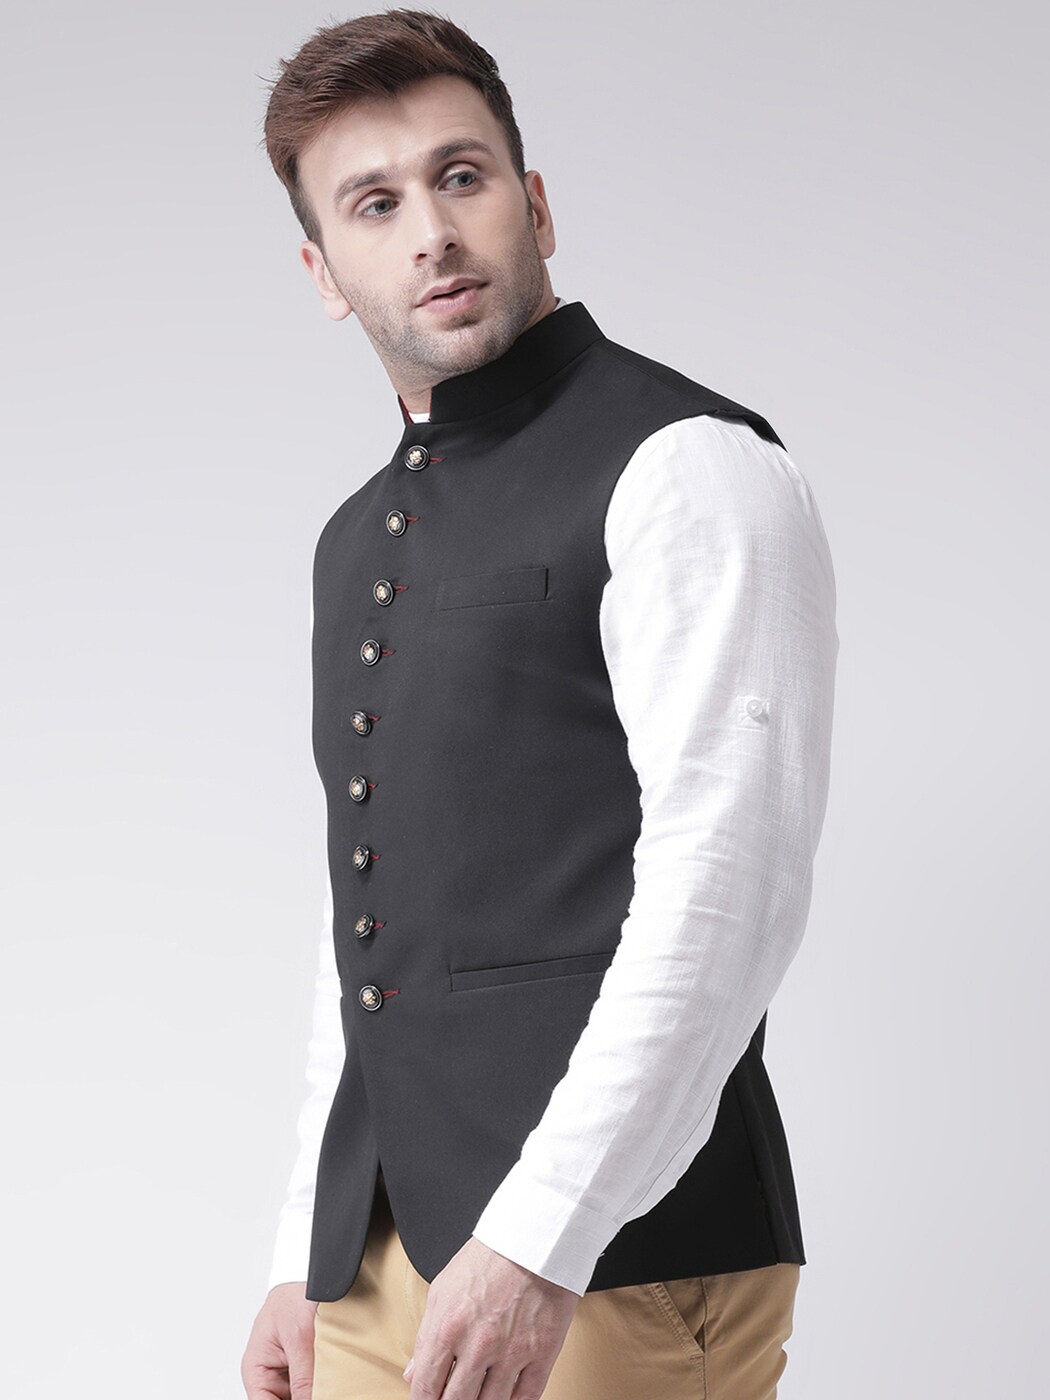 Plain Black Nehru Jacket With White Shirt and Trouser - Etsy Norway